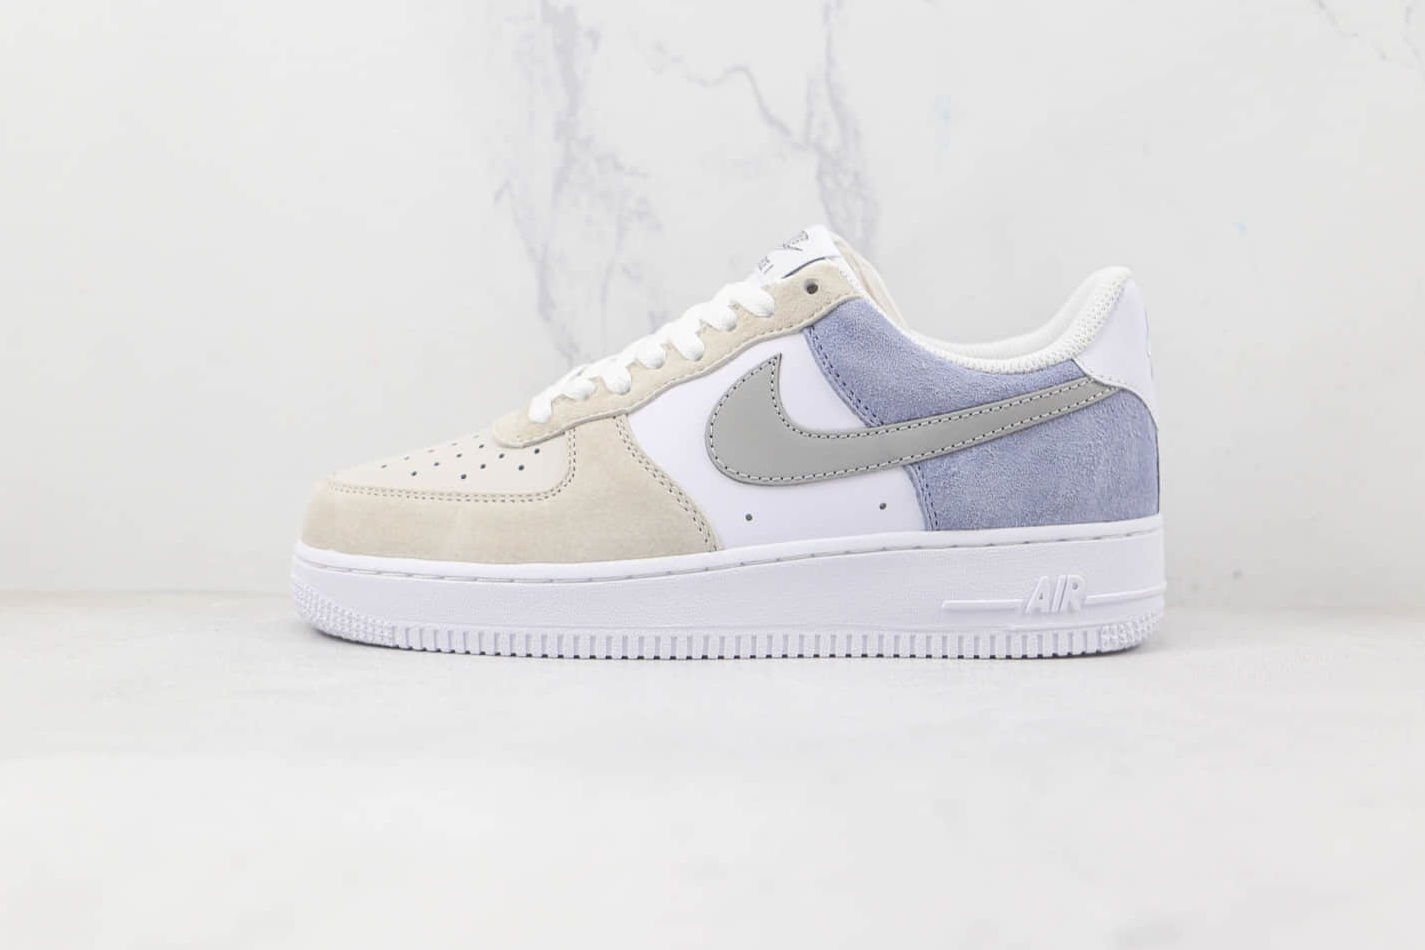 Nike Air Force 1 07 Low White Grey Purple Shoes LM2033-208 - Stylish Footwear for the Trendsetters